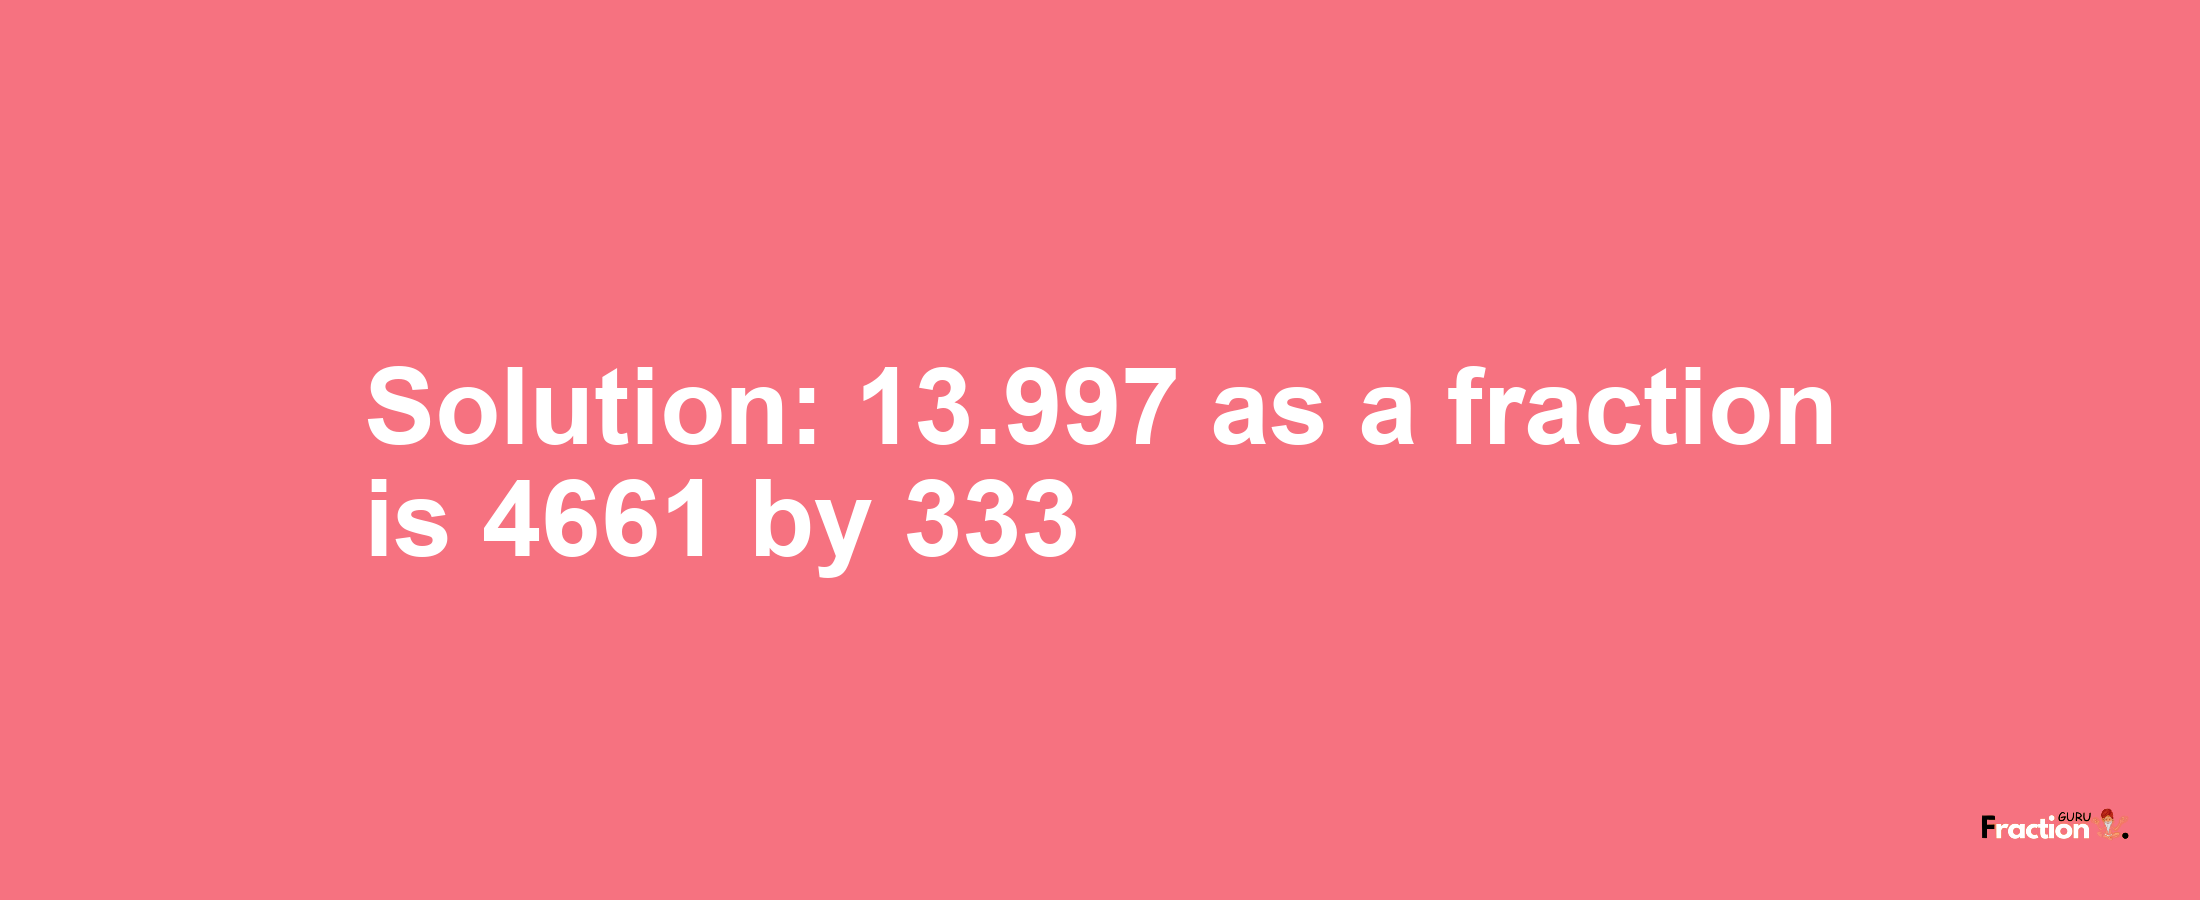 Solution:13.997 as a fraction is 4661/333